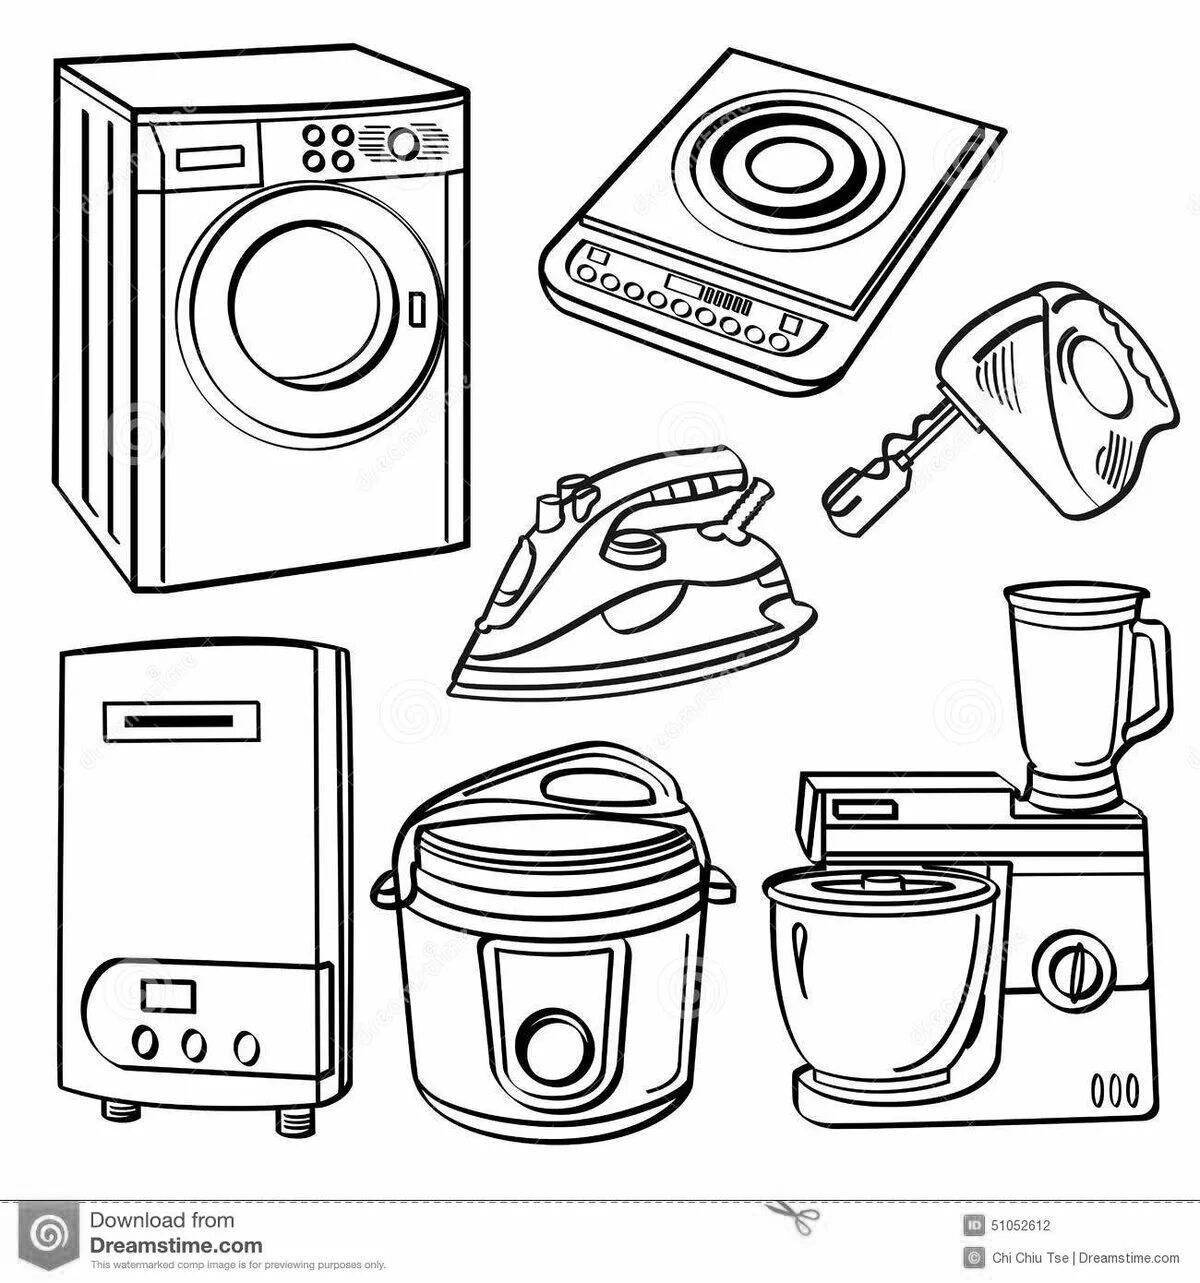 Coloring page elegant electrical devices